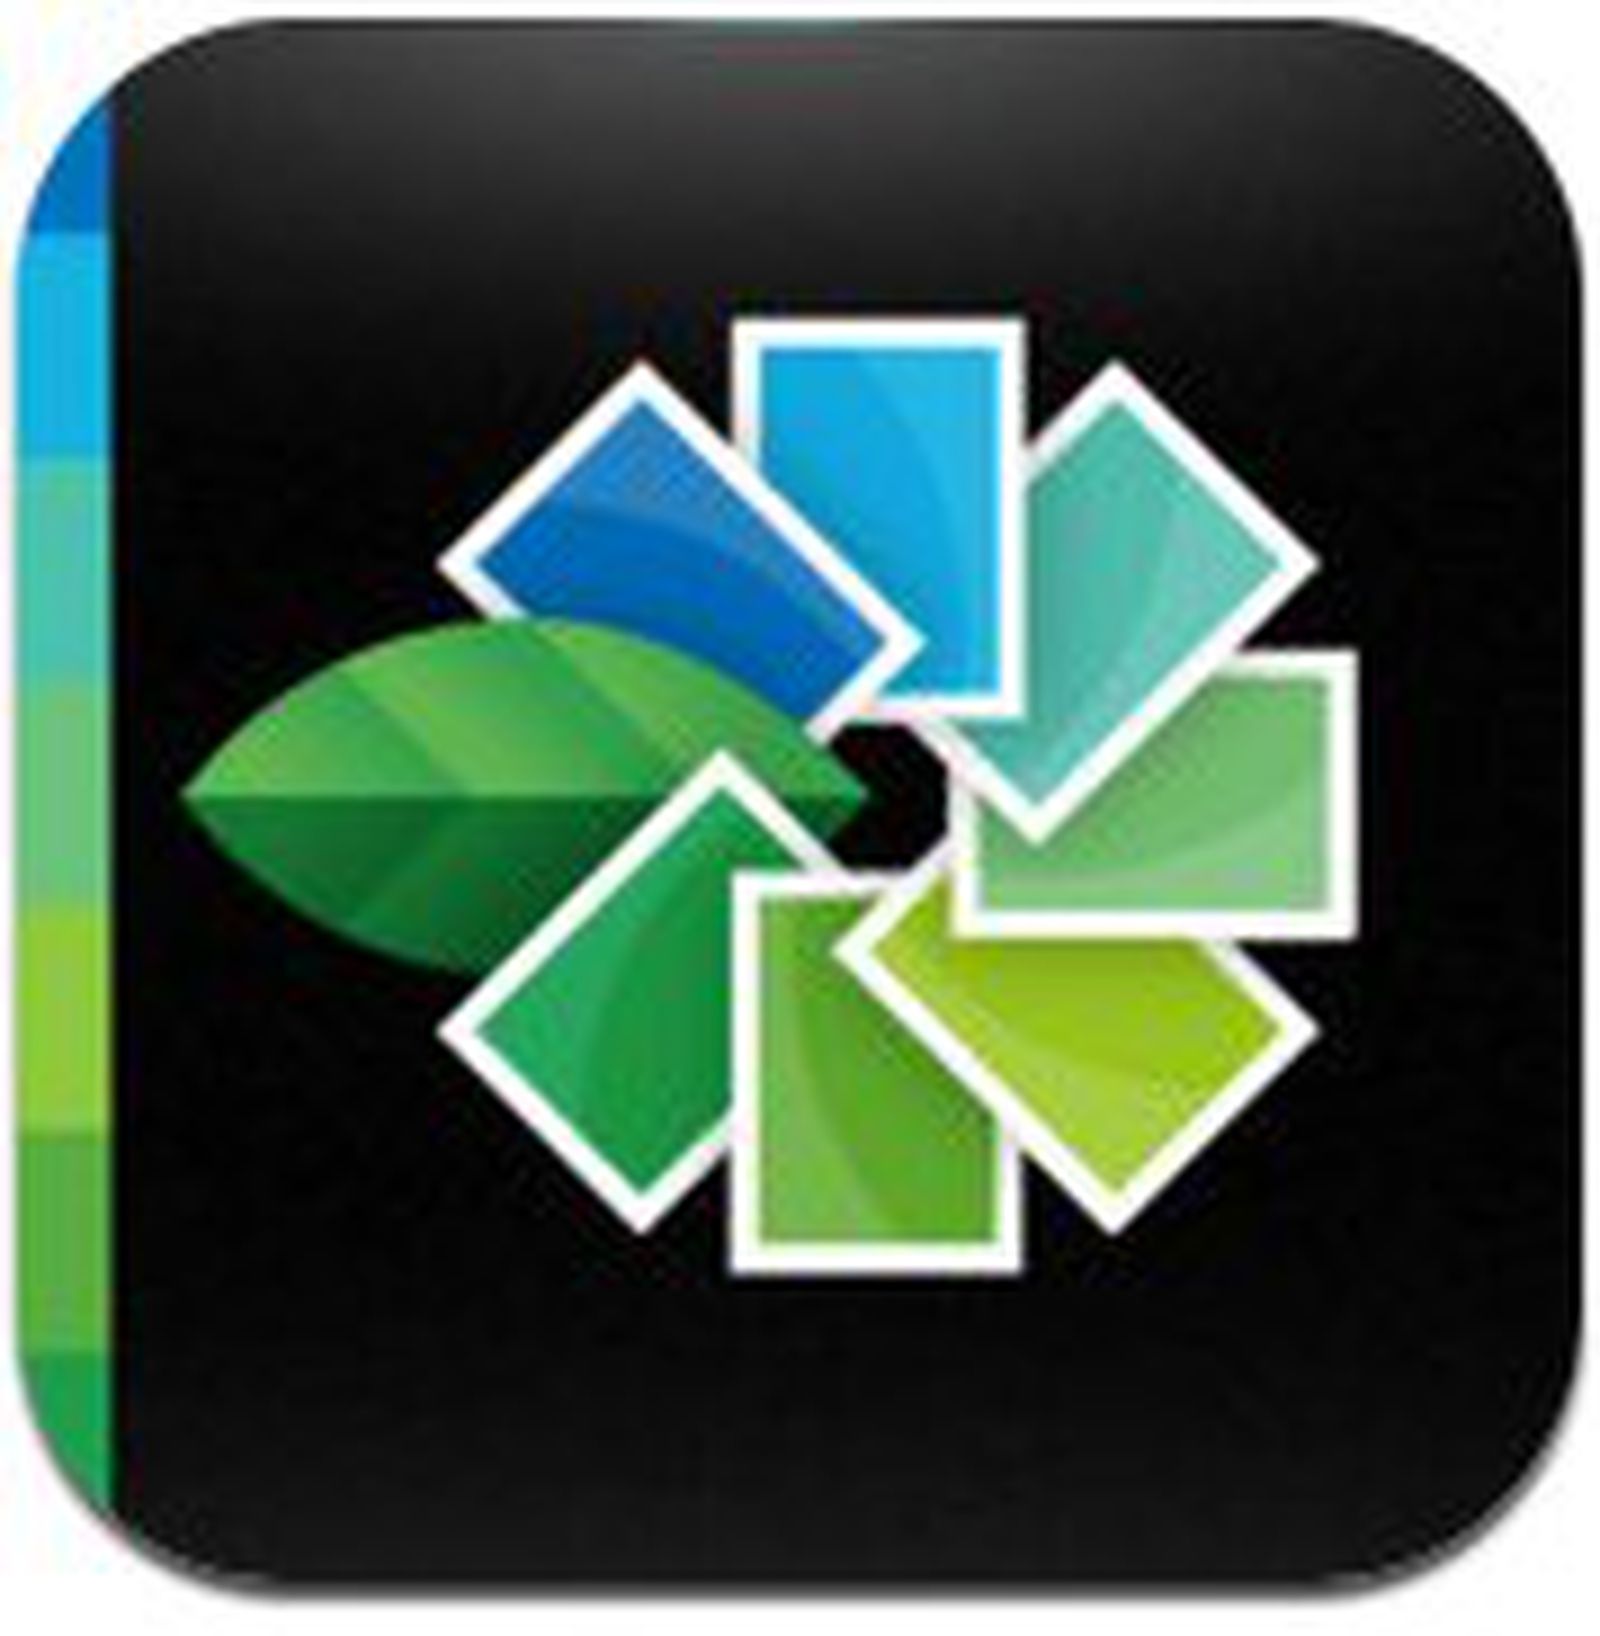 snapseed for mac 2020